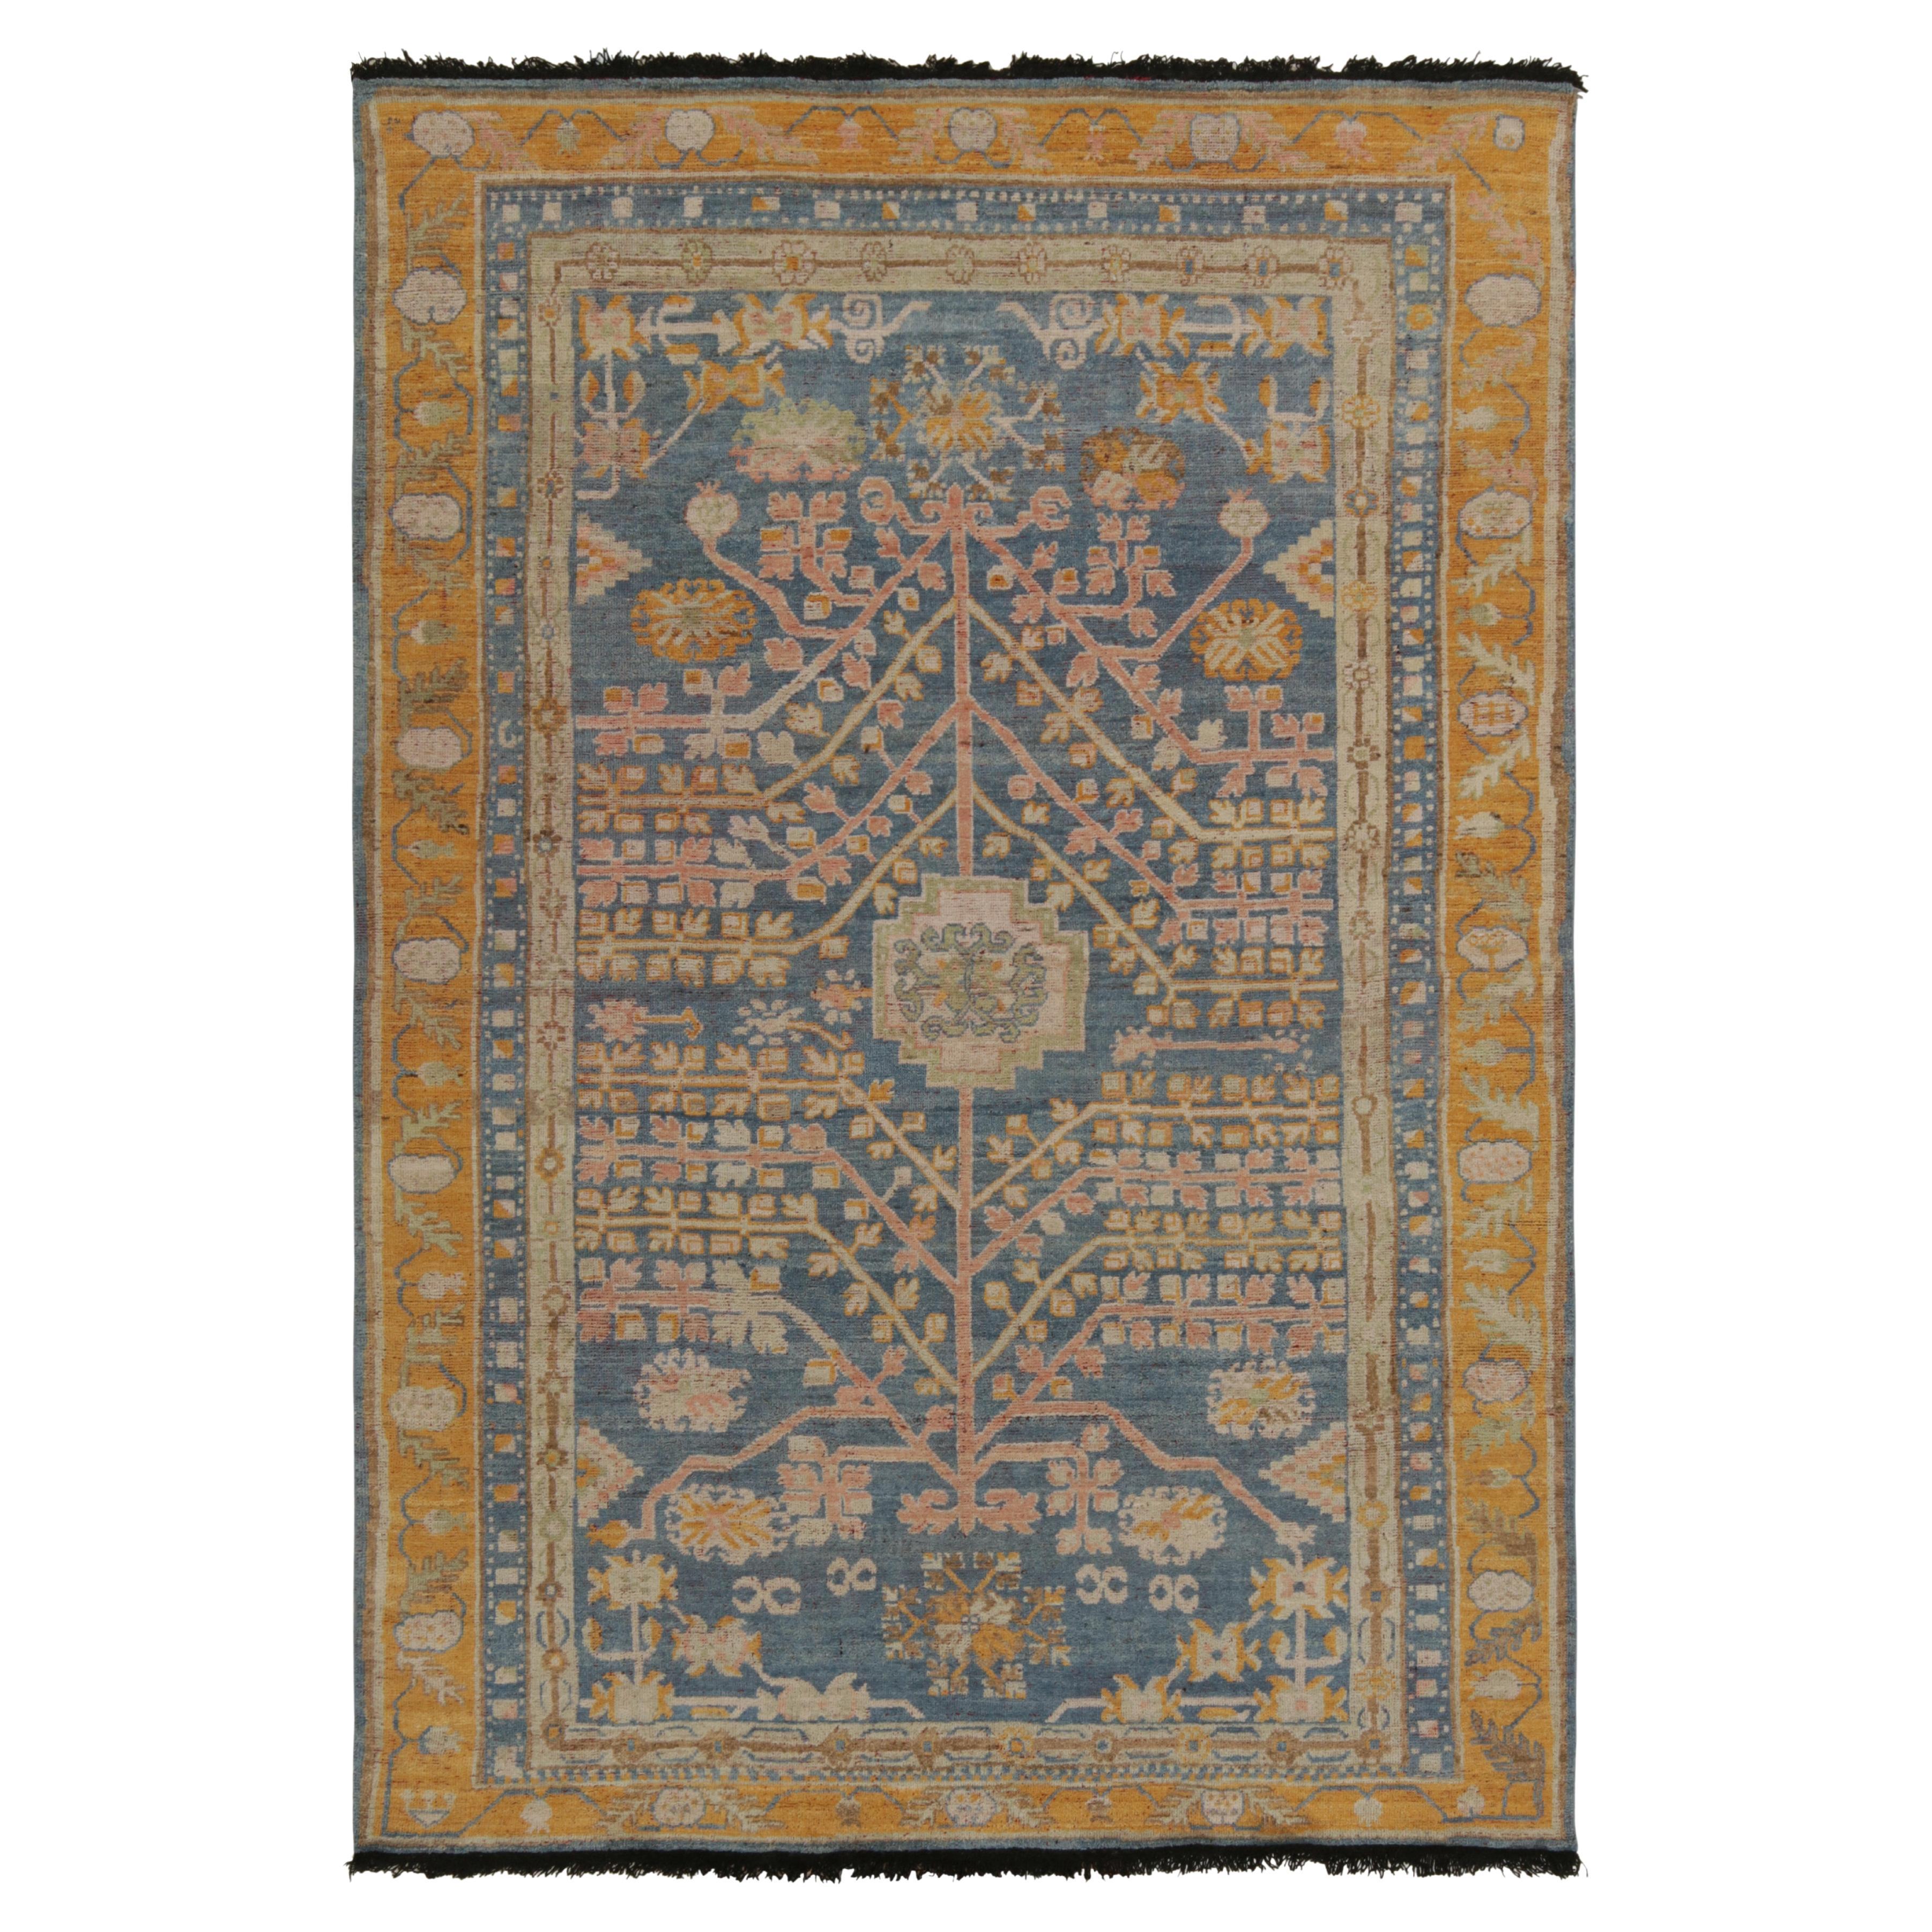 Rug & Kilim’s Khotan Style Rug in Blue, Gold and Pink Geometric-Floral Patterns